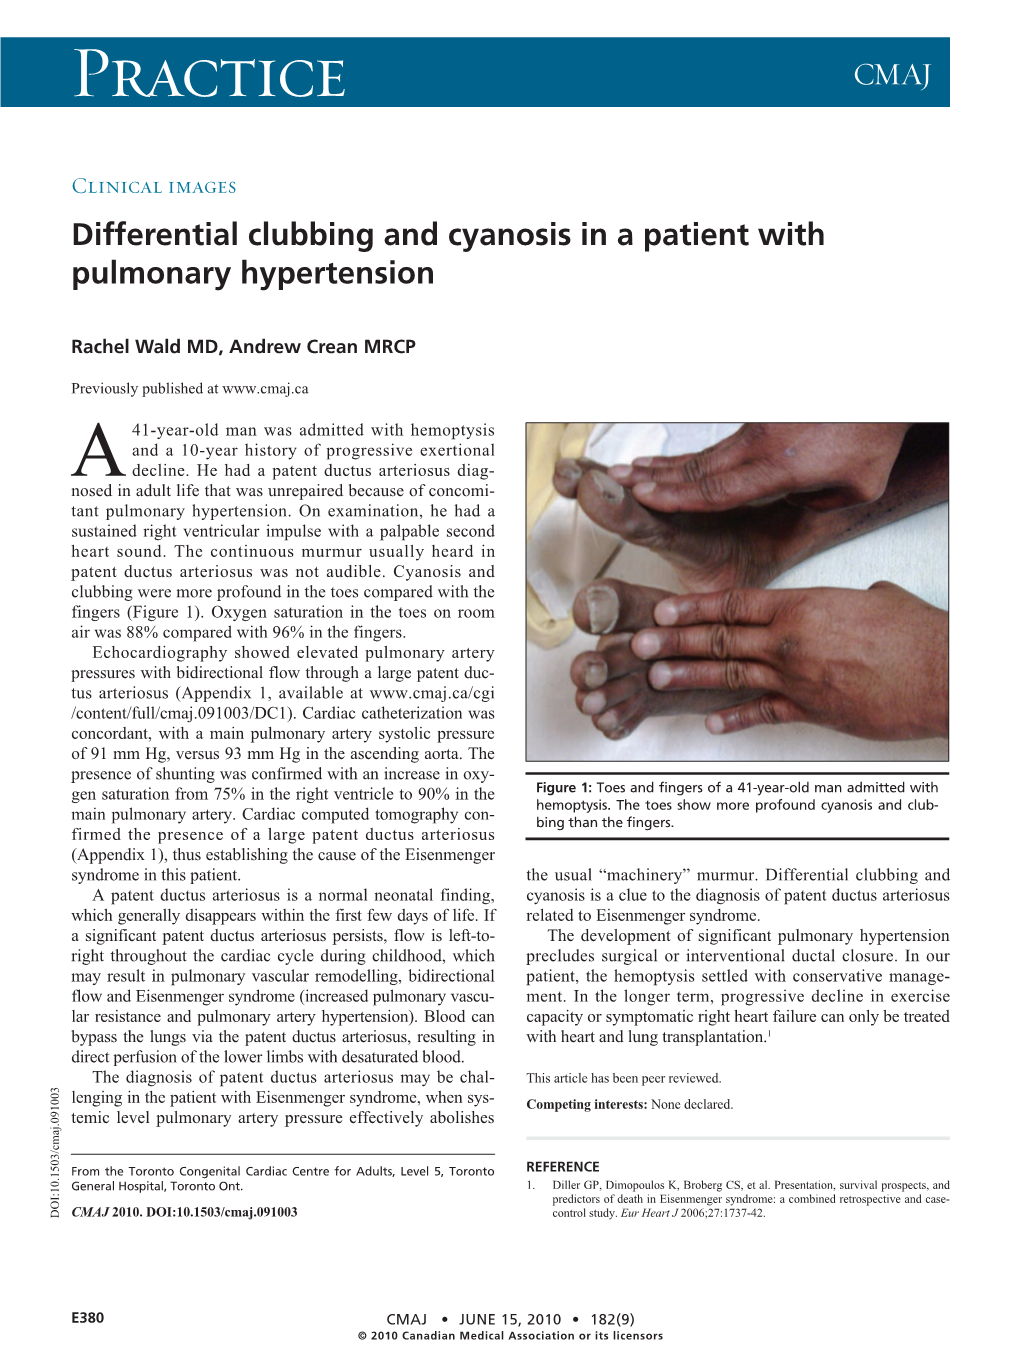 Differential Clubbing and Cyanosis in a Patient with Pulmonary Hypertension